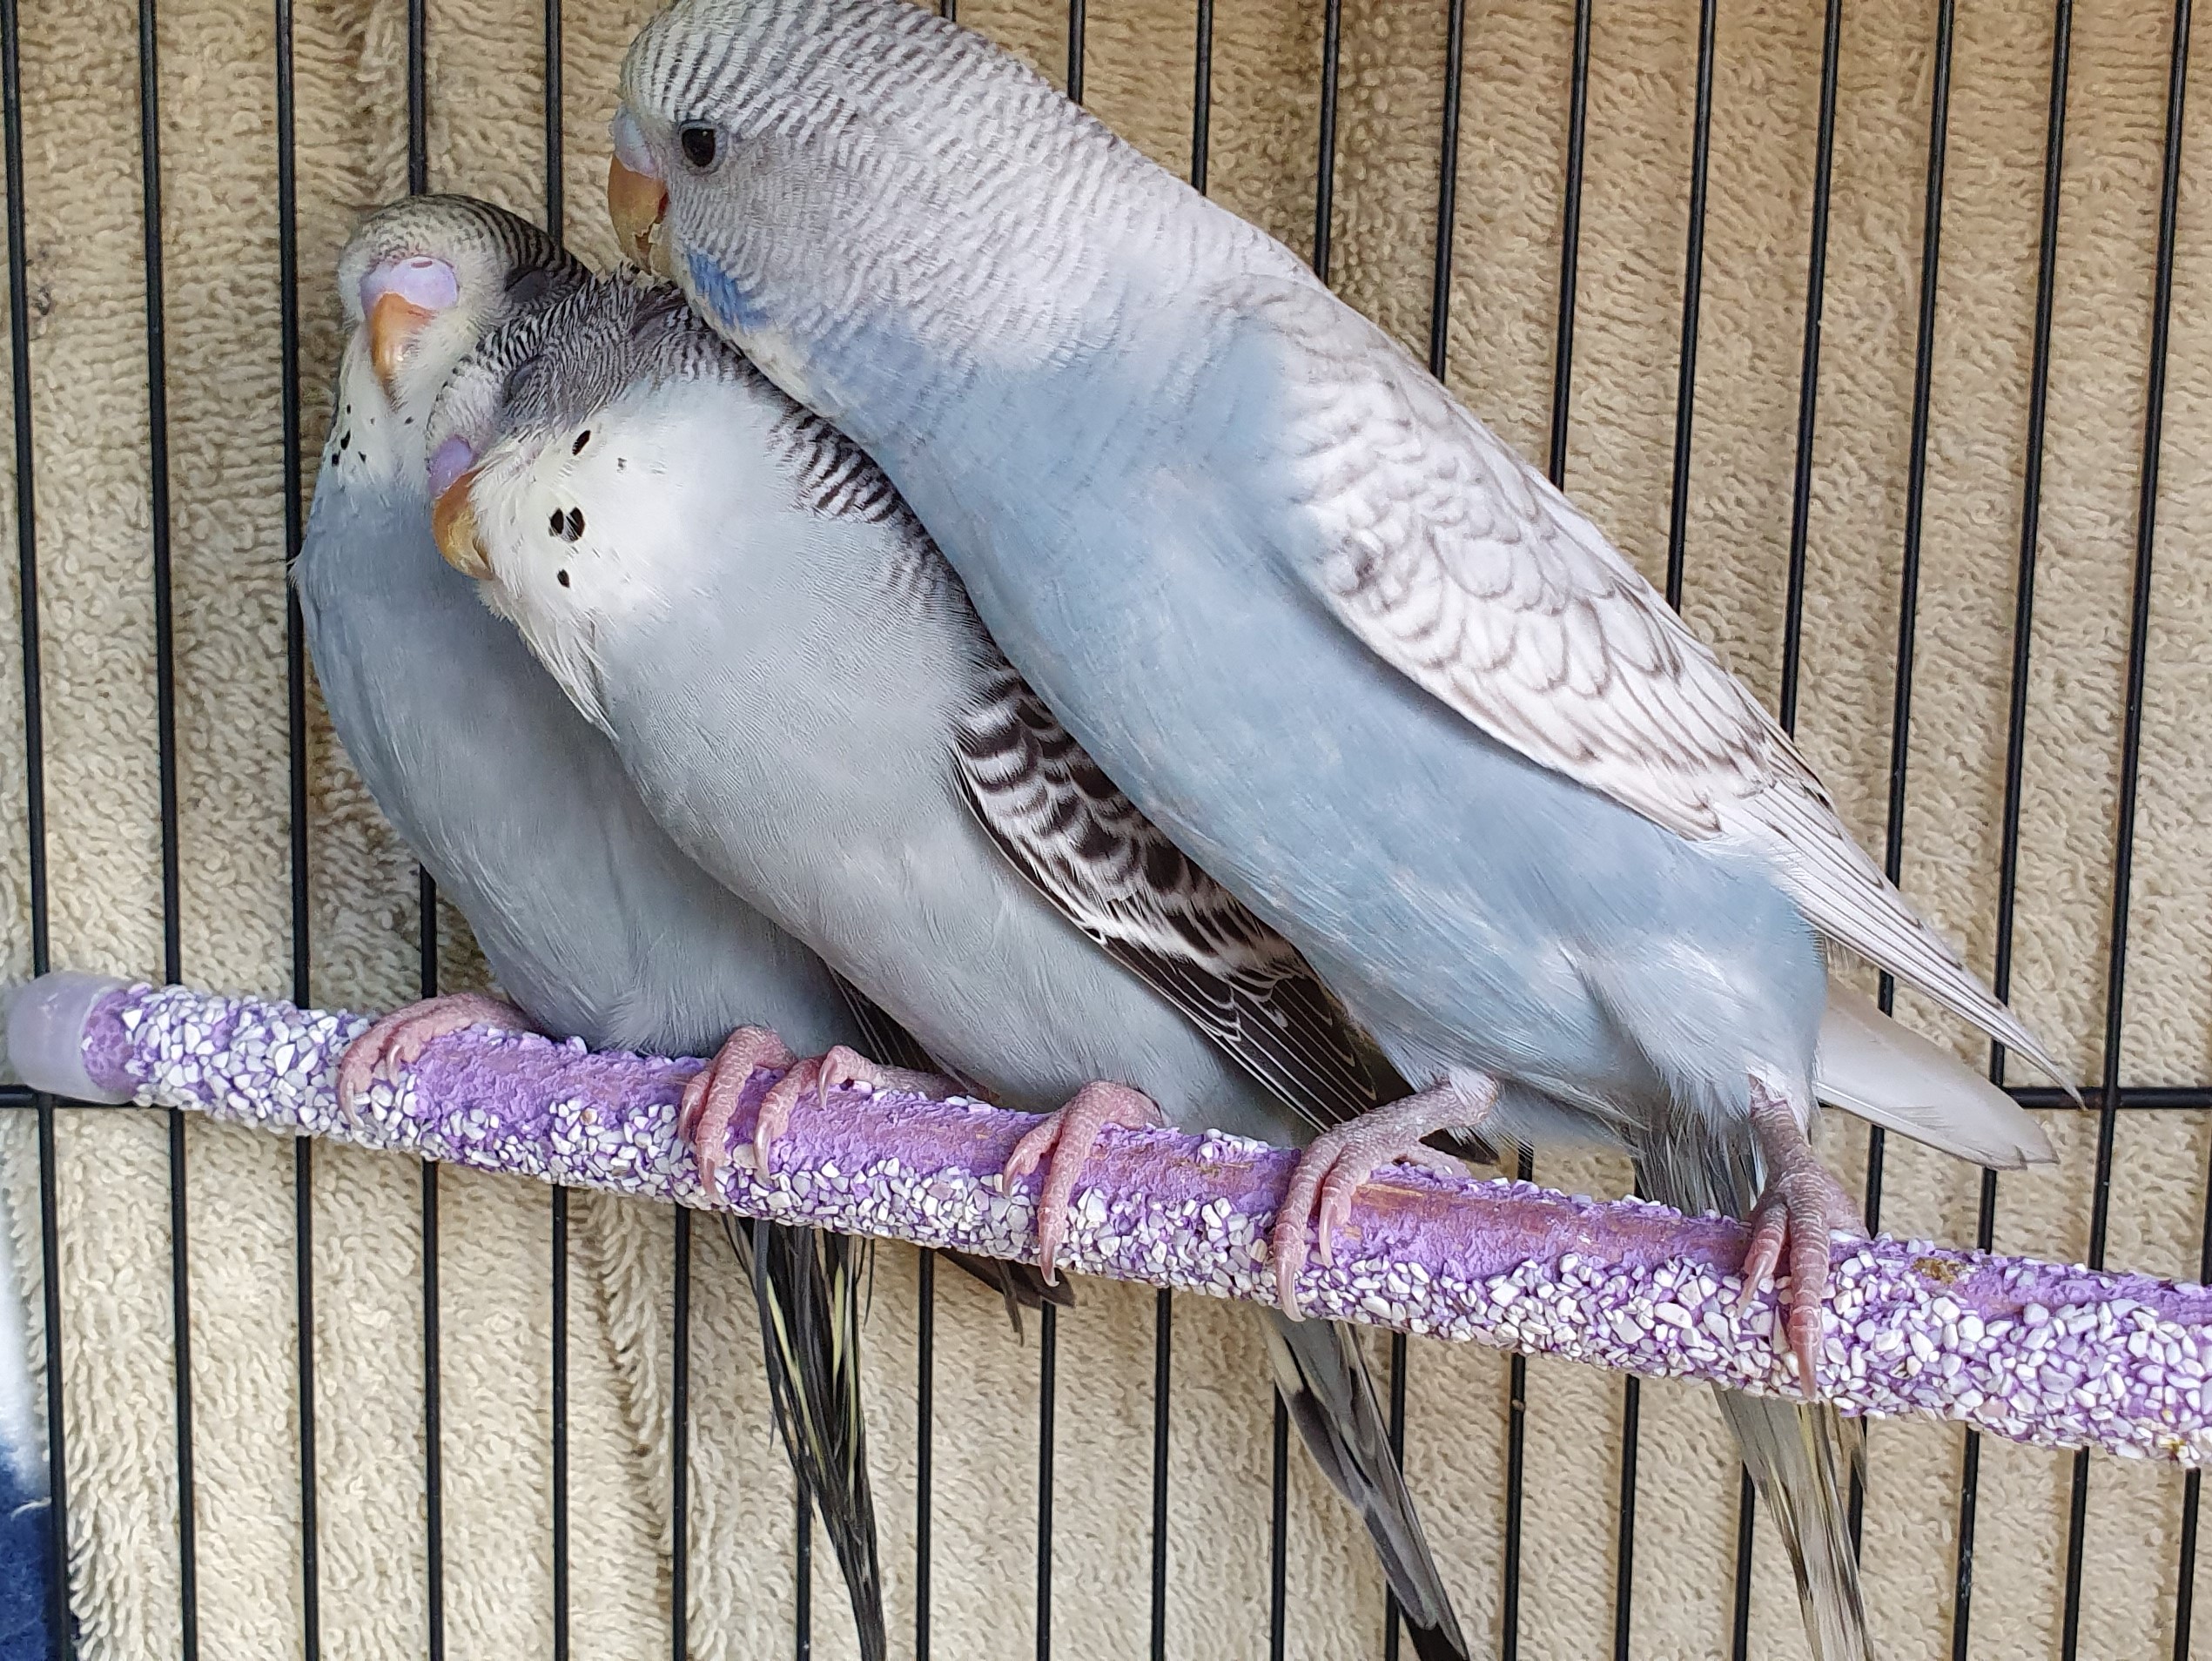 Young Budgies for sale, direct from the seller